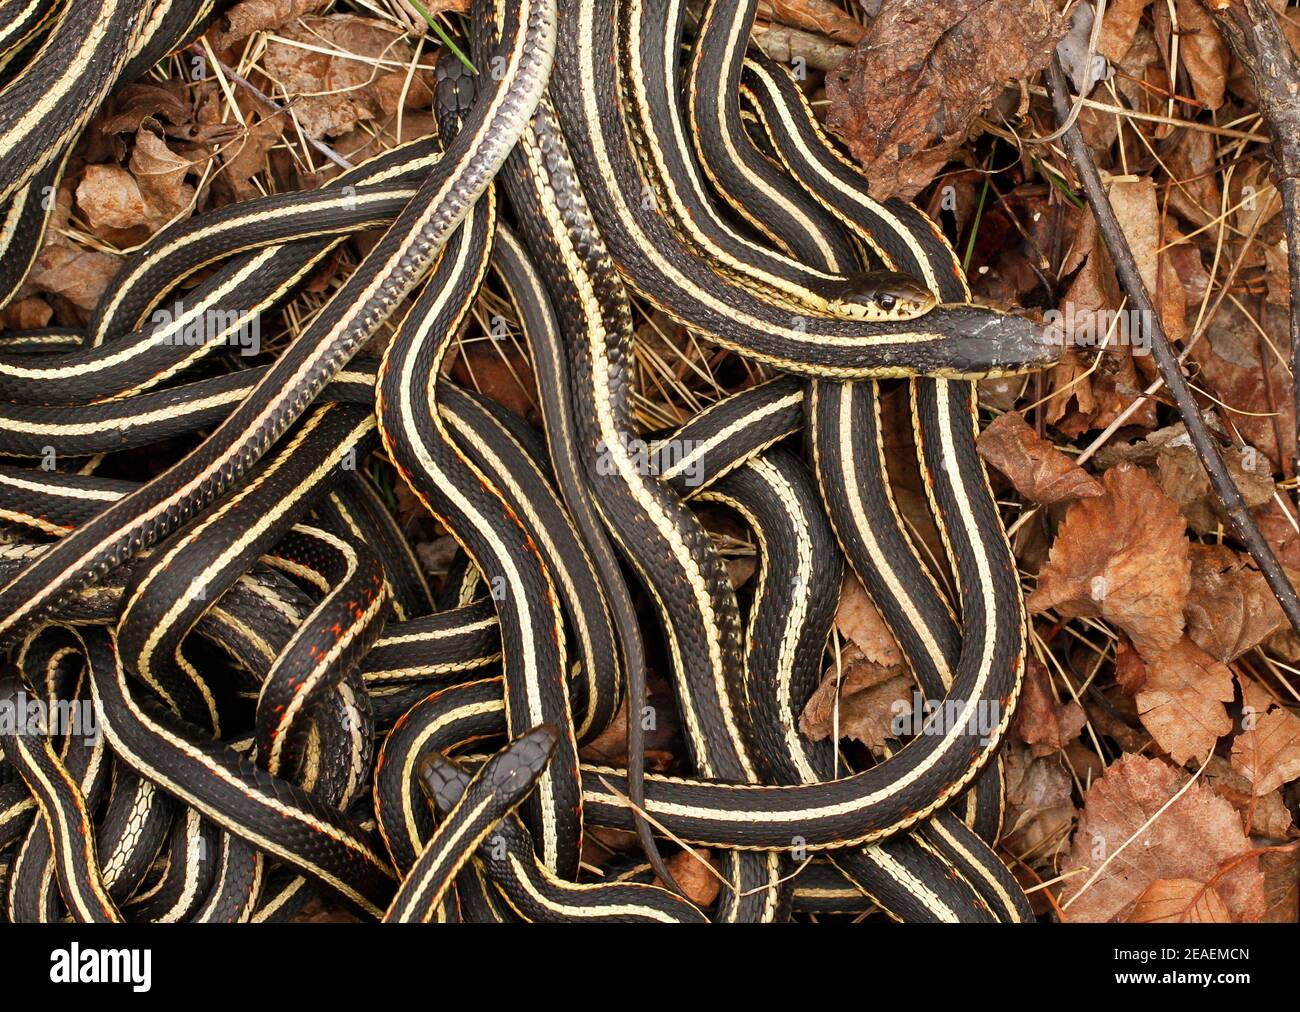 Group of male red sided garter snakes, Thamnophis sirtalis parietalis, trying to mate with bigger female at the Narcisse Snake Dens, Manitoba, Canada. Stock Photo